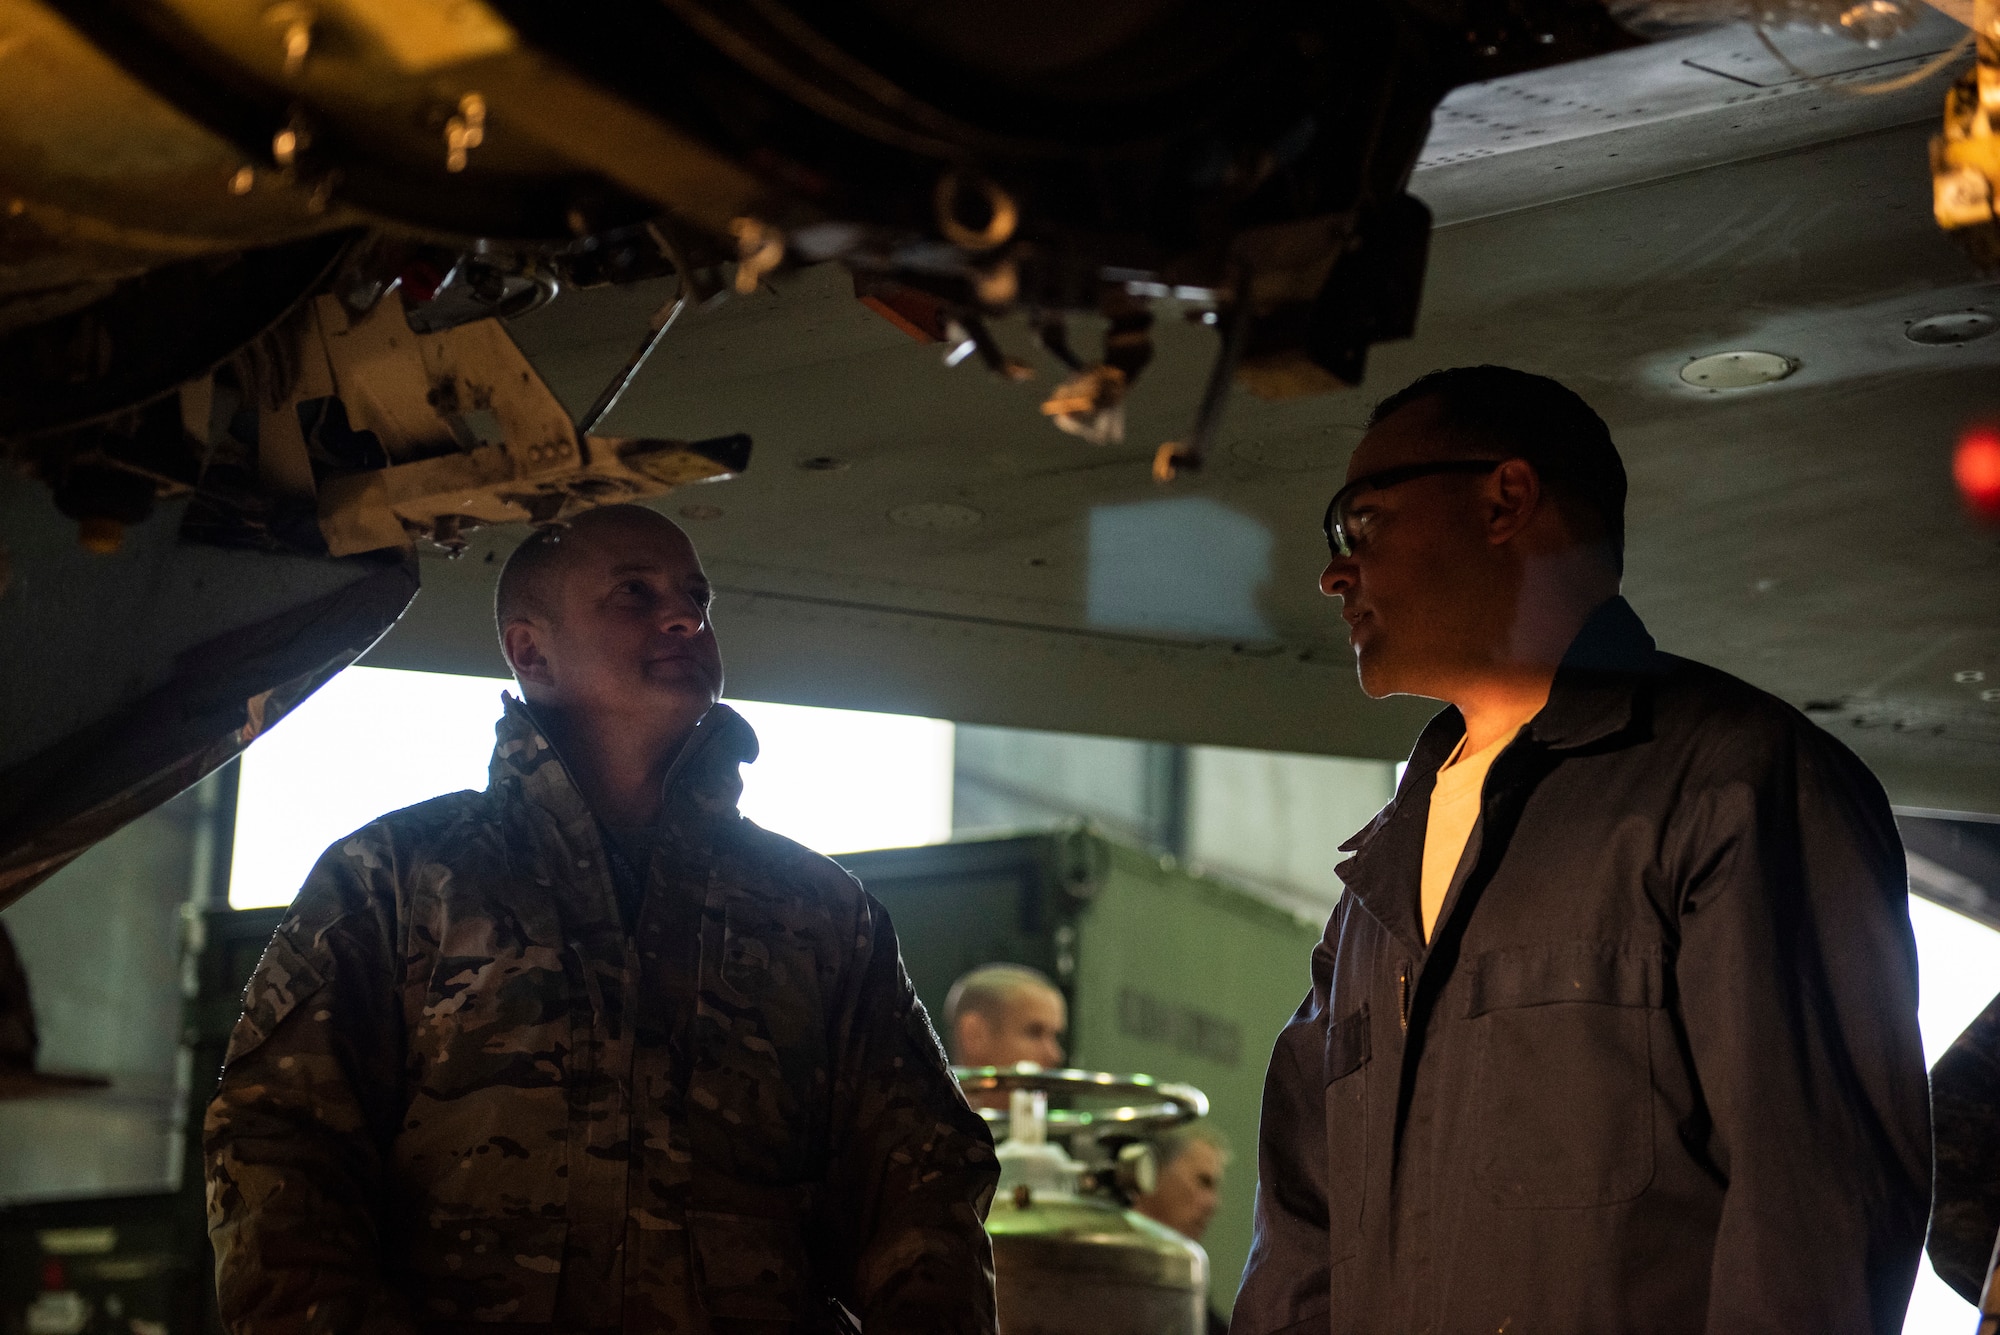 U.S. Air Force Staff Sgt. Joseph Gallegos, 309th Aircraft Maintenance Group depot structural maintenance specialist (right) from Hill Air Force Base, Utah, explains various components of an F-16 Fighting Falcon intake to Col. John Bosone, 8ith fighter Wing commander (left), at Kunsan Air Base, Republic of Korea, Nov. 8, 2018. The replacement is part of a maintenance initiative to structurally repair dated parts on some of the F-16s and enhance the lethality of the Wolf Pack fleet. (U.S. Air Force photo by Senior Airman Stefan Alvarez)